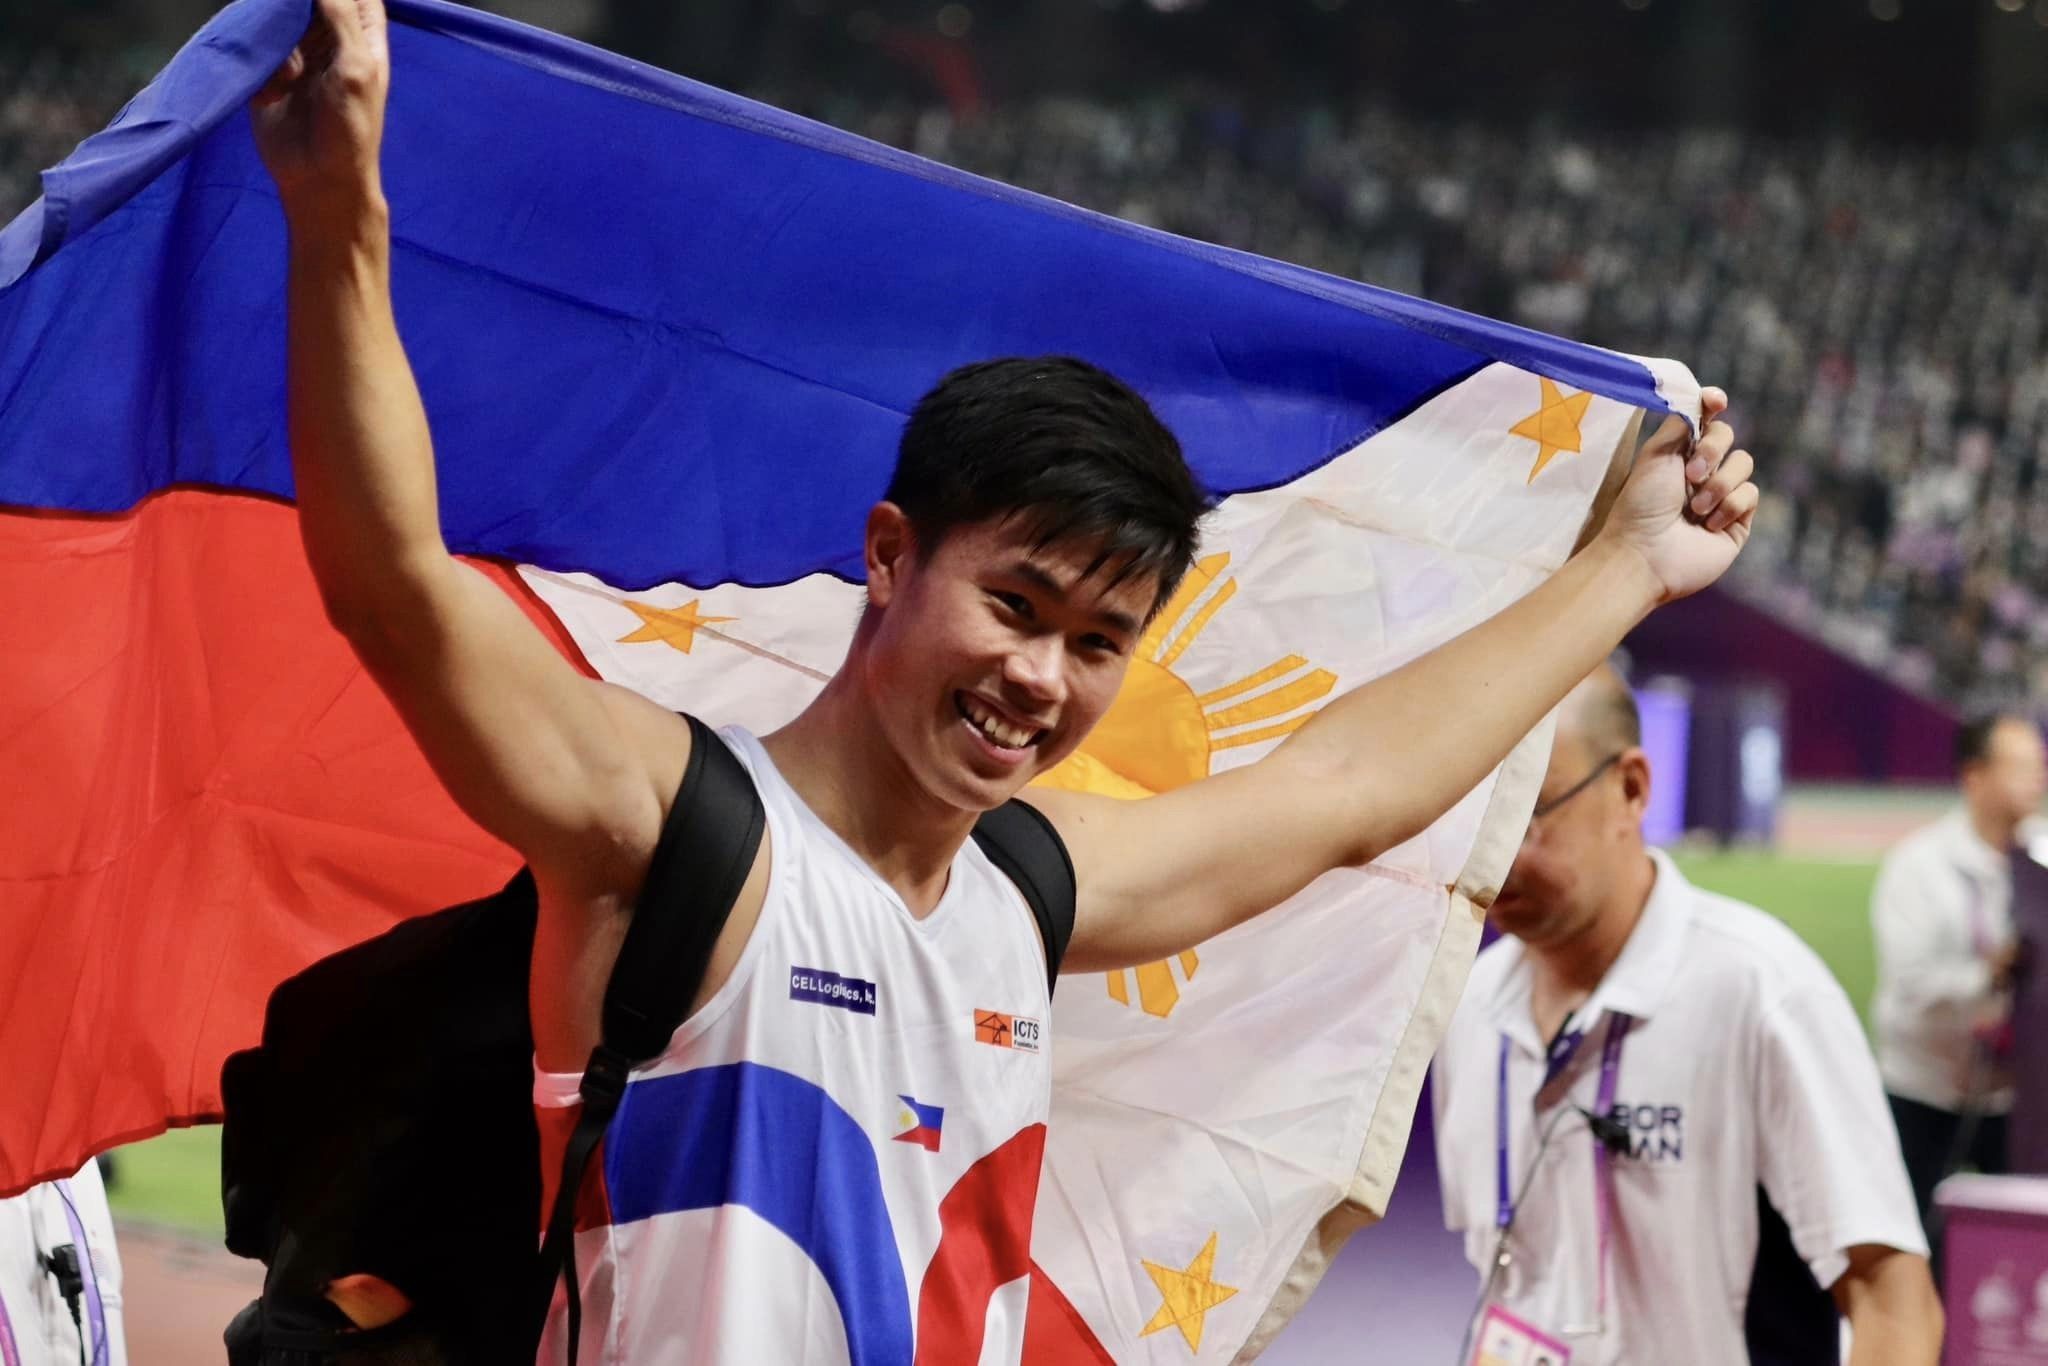 Philippines concludes 19th Asian Games with identical gold medal haul as 2018